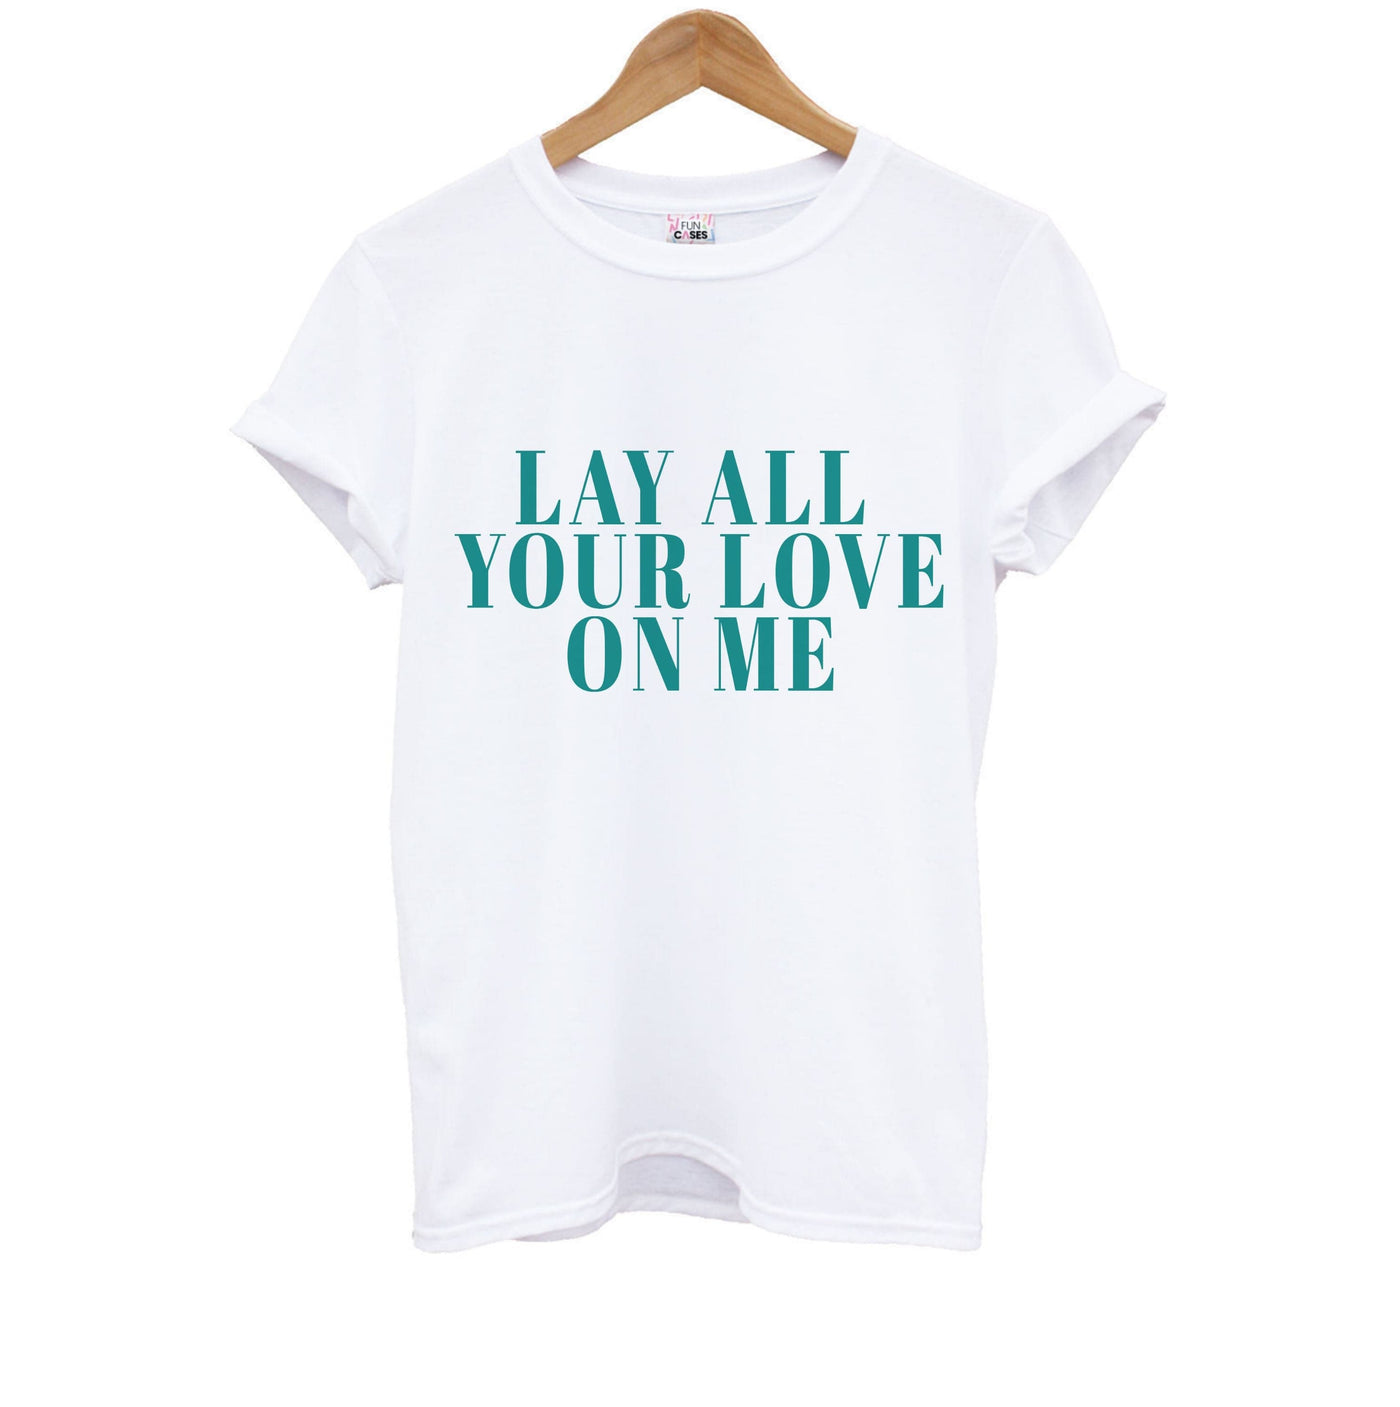 Lay All Your Love On Me - Mamma Mia Kids T-Shirt